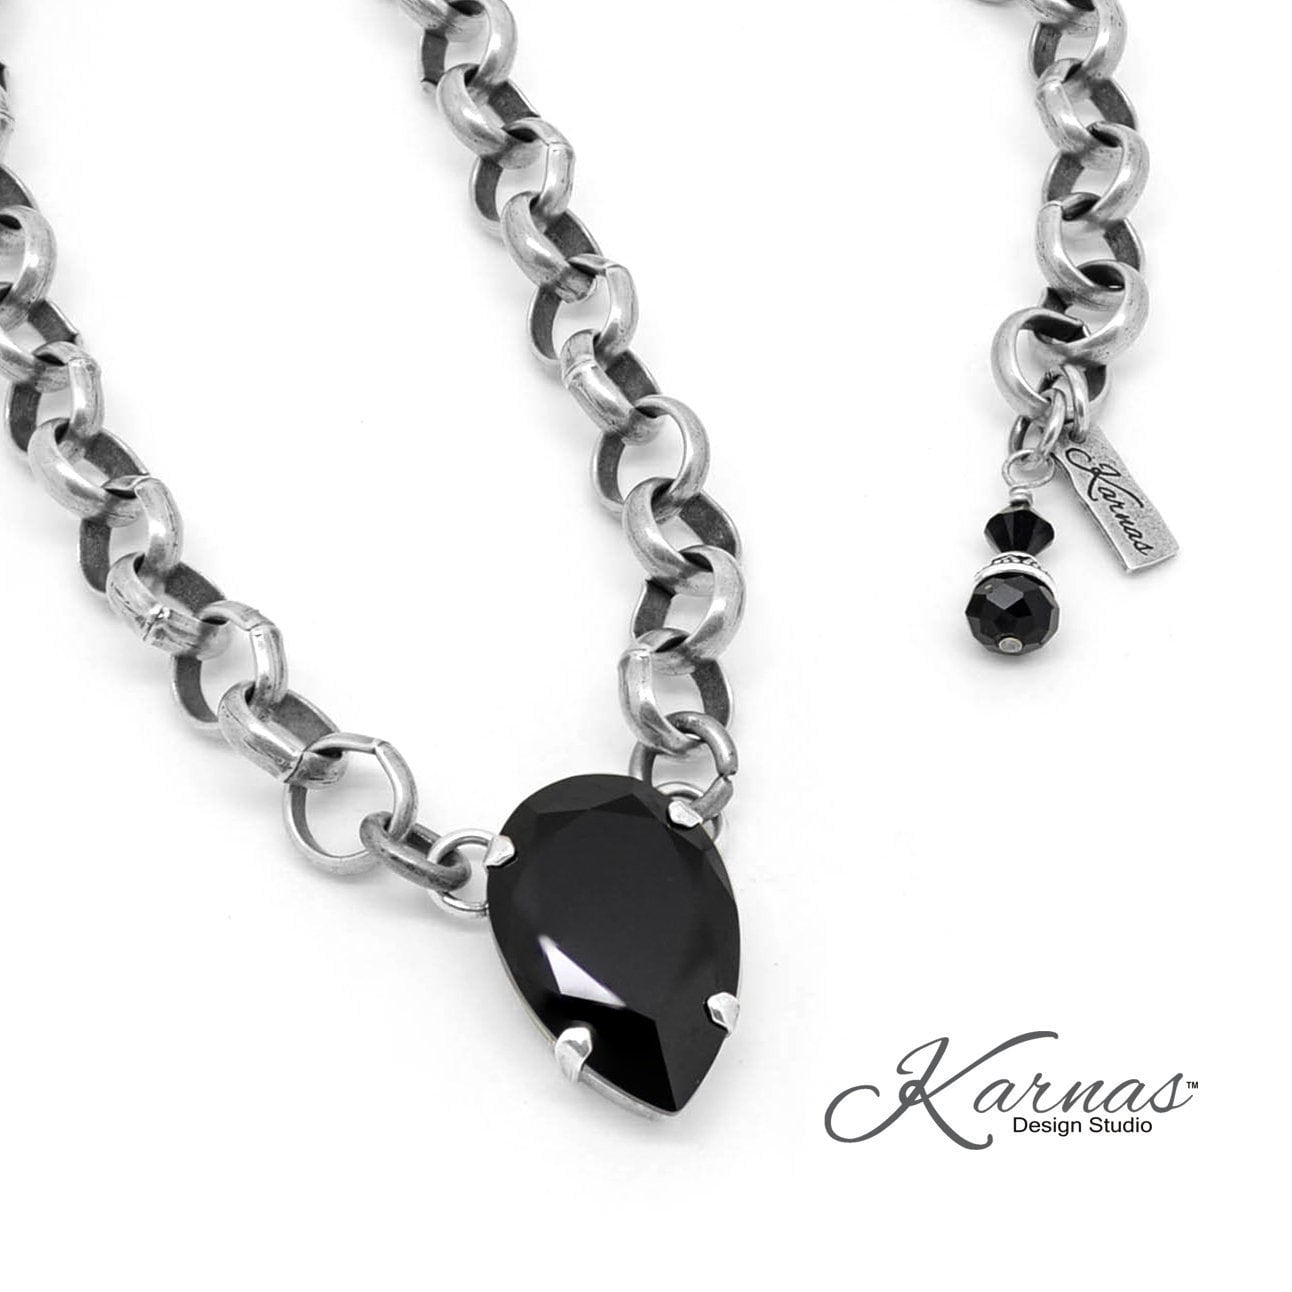 Jet Black 30X20mm Xl Pear Statement Chain Necklace Made With K.d.s. Premium Crystal Antique Silver Karnas Design Studio Free Shipping